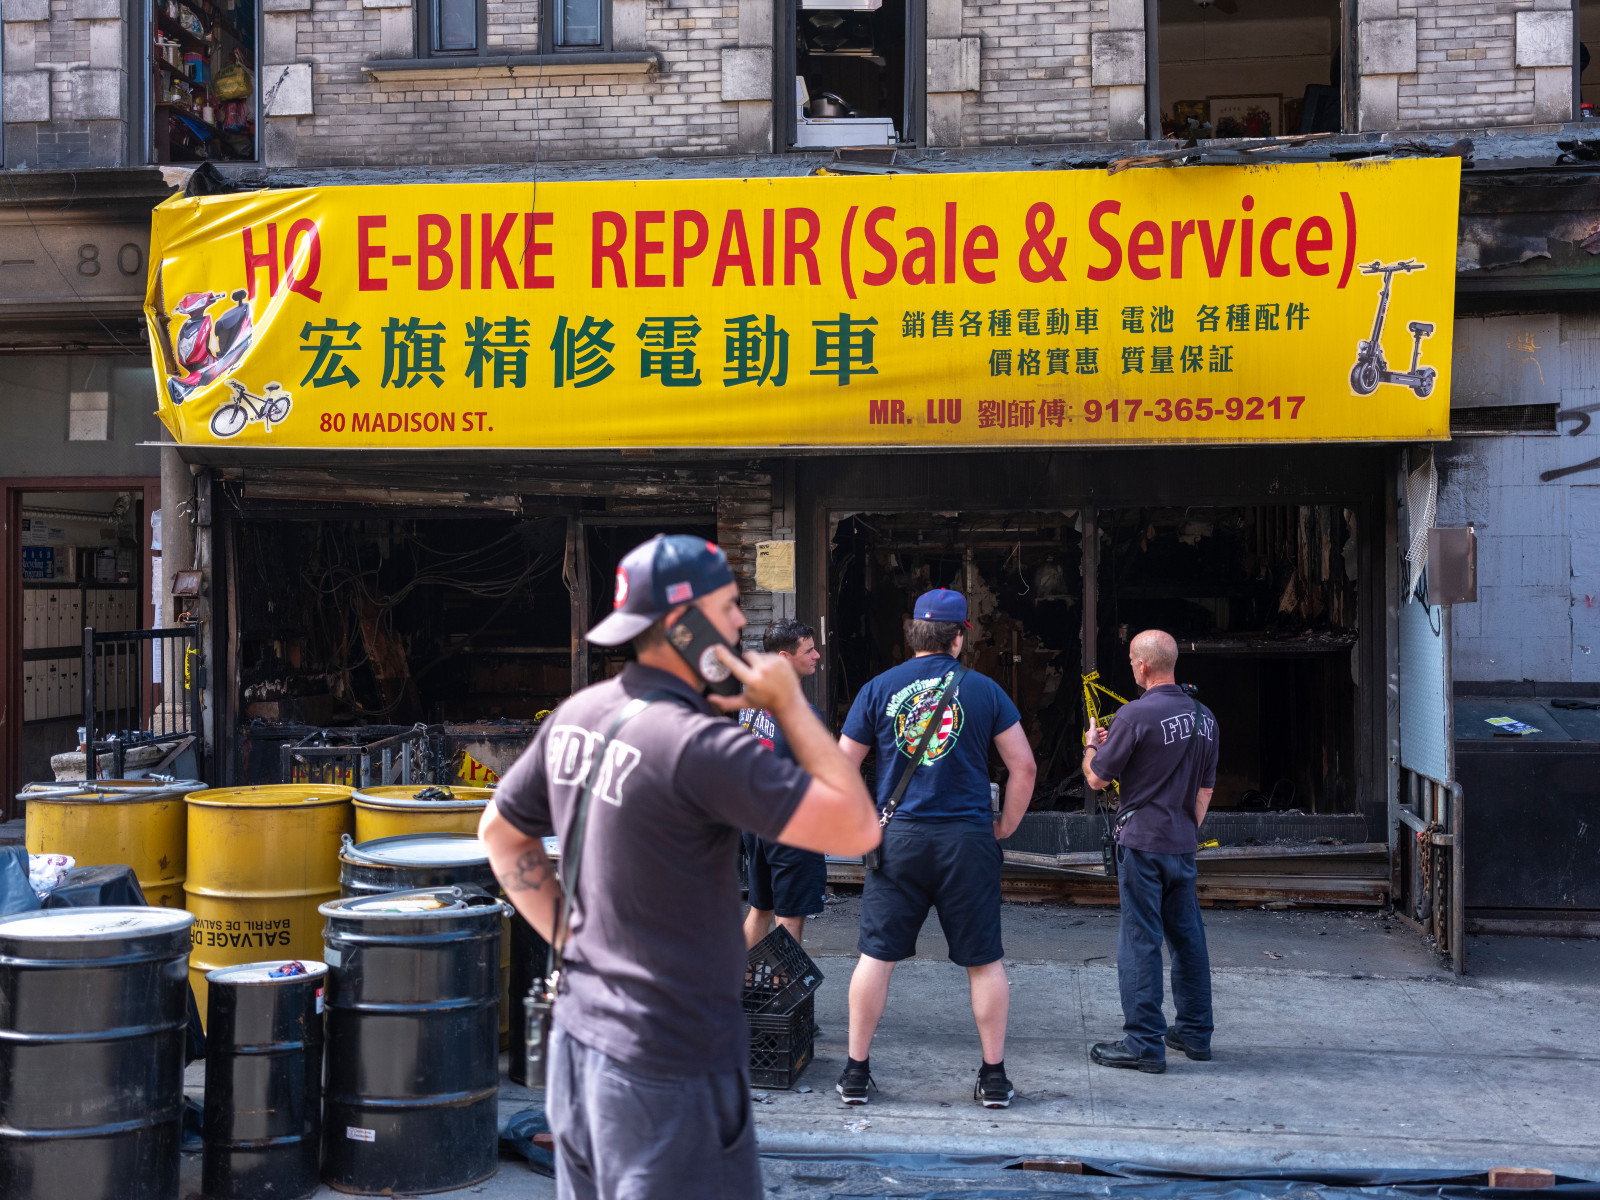 A man wearing an FDNY shirt holds a cell phone to his ear in front of the burned-out shell of a shop under the sign "HQ E-BIKE REPAIR (Sale & Service)"